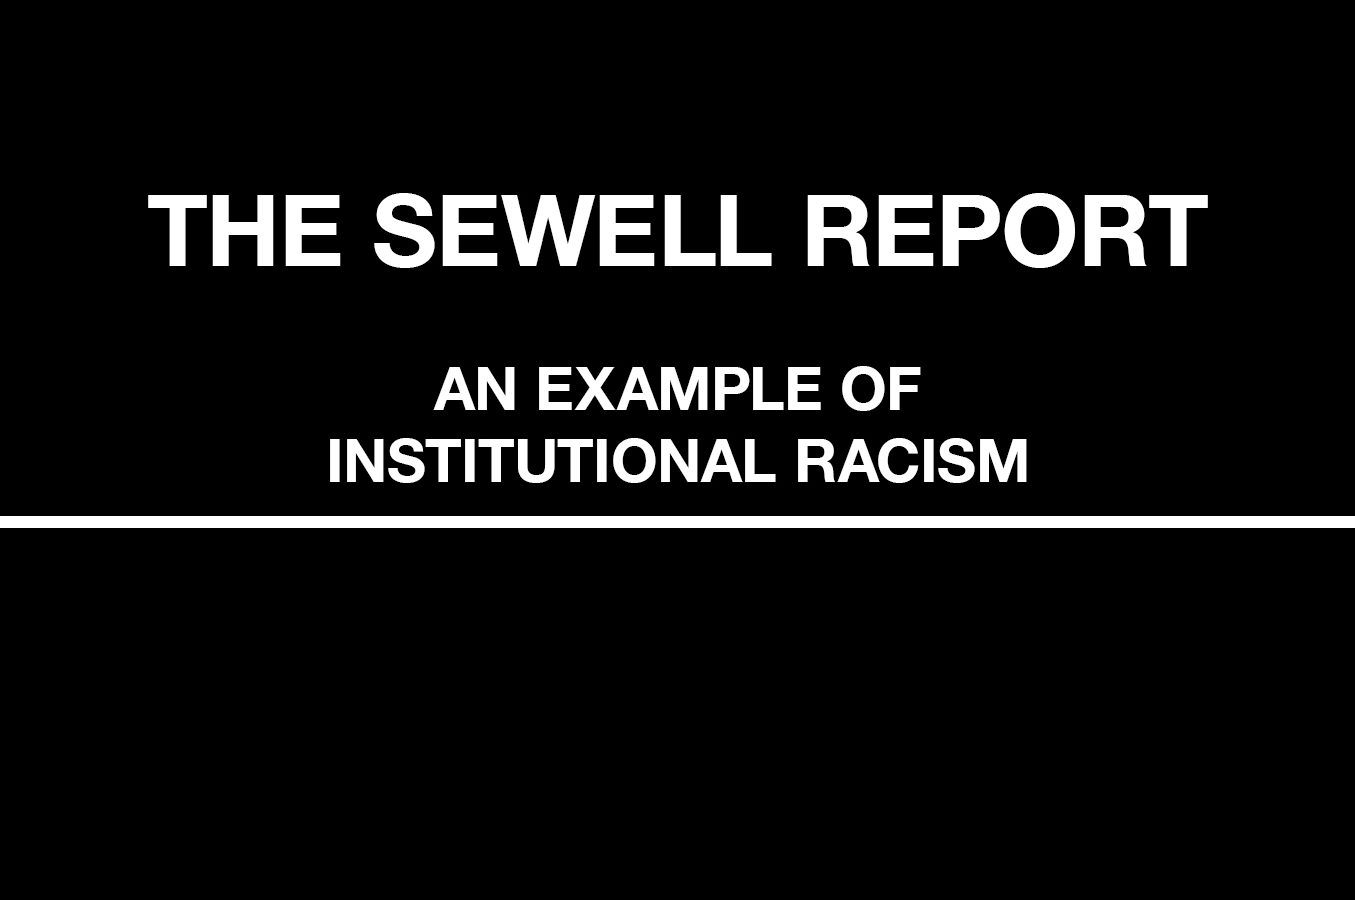 The Sewell Report: an example of institutional racism